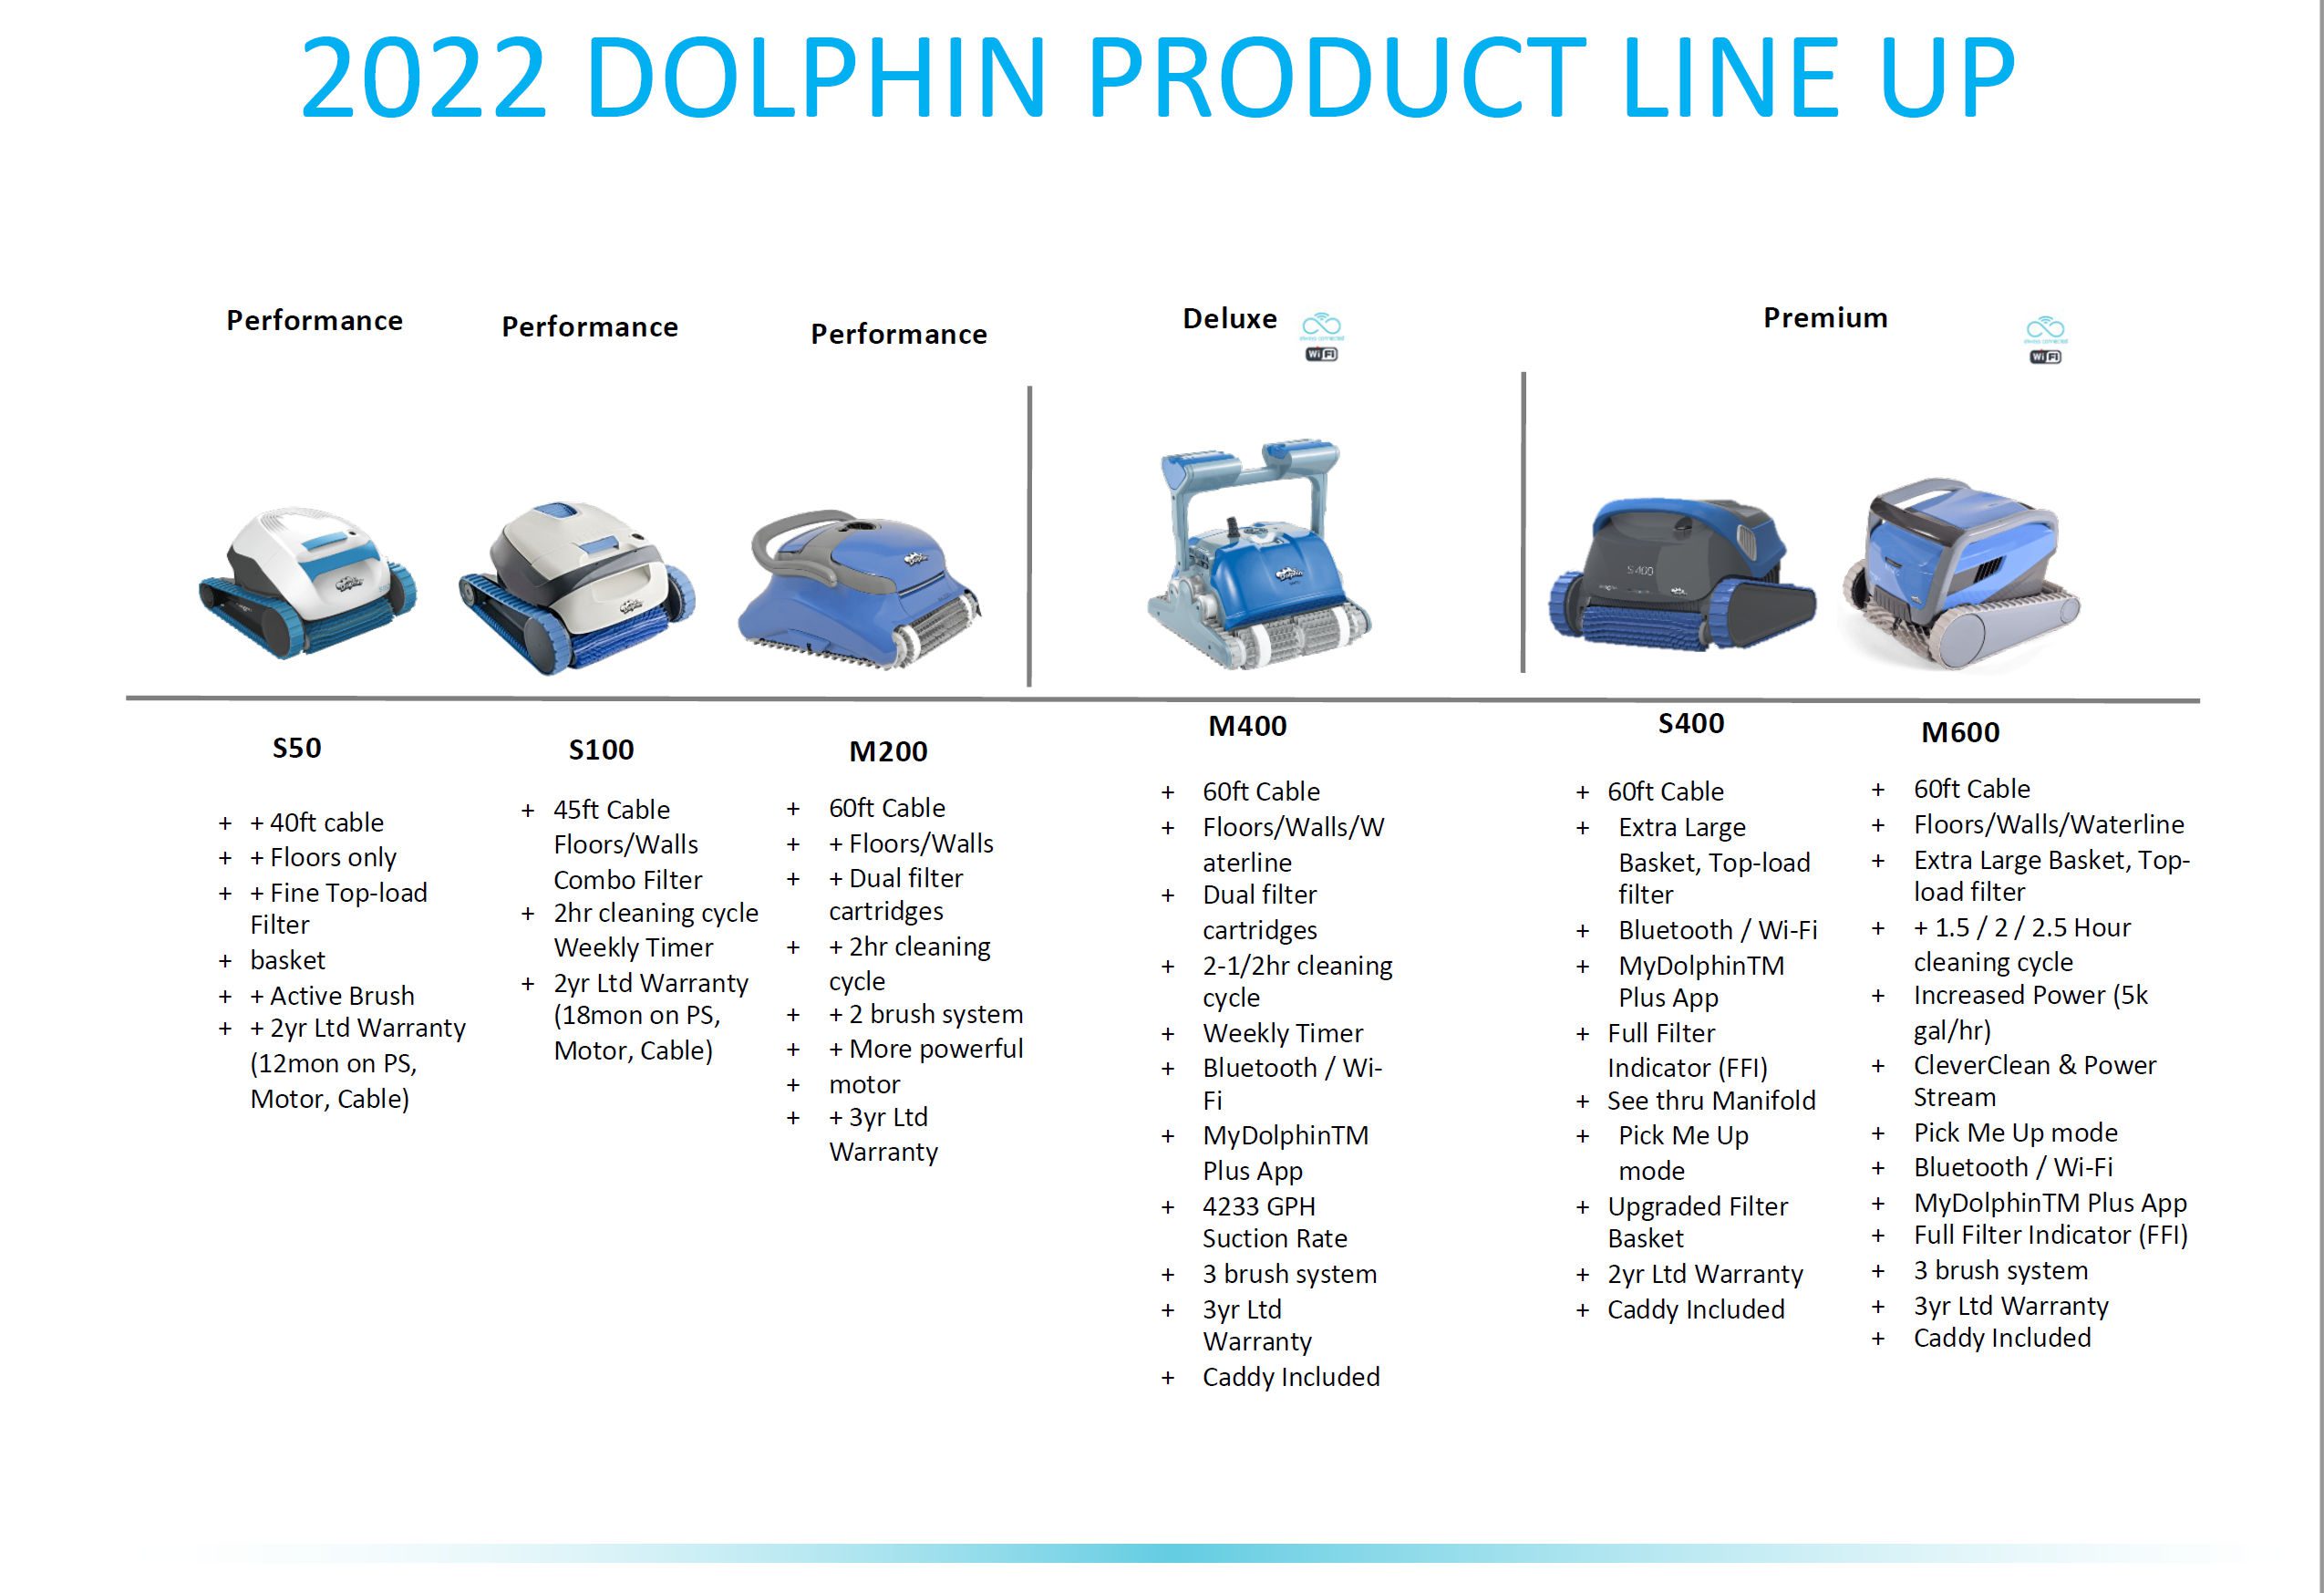 Dolphin LIne Up